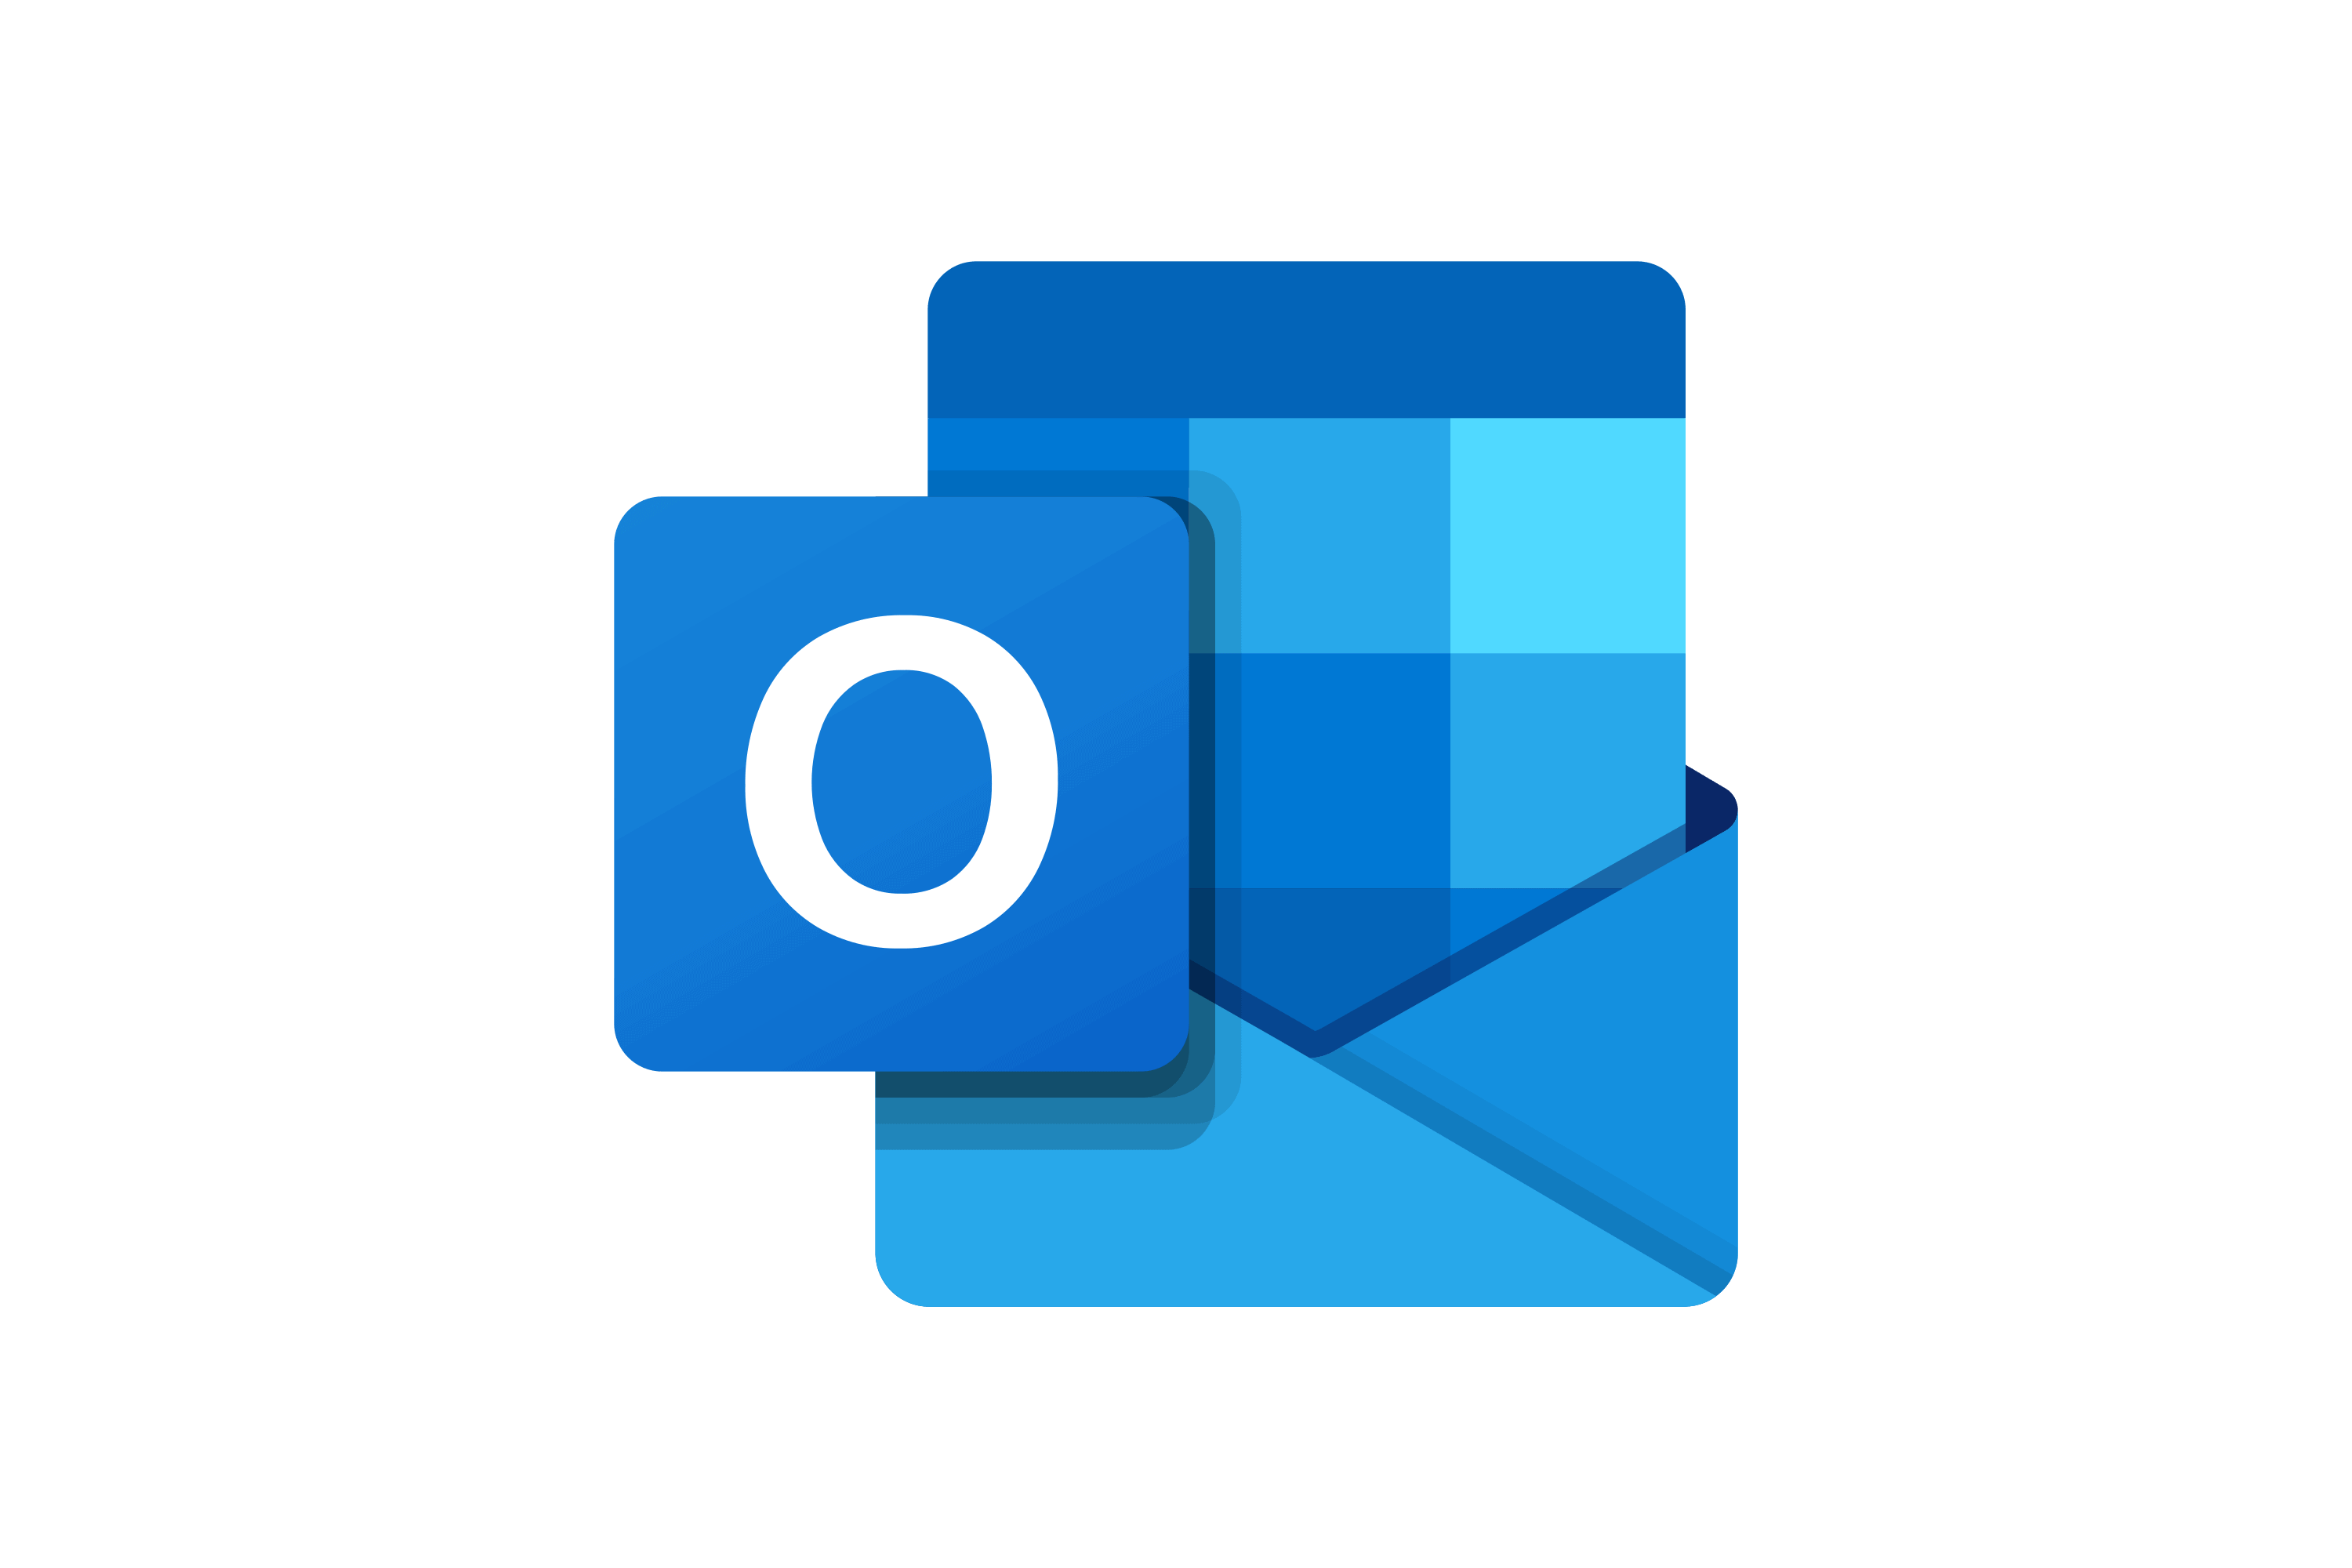 Microsoft Outlook for iOS gets updated with new feature